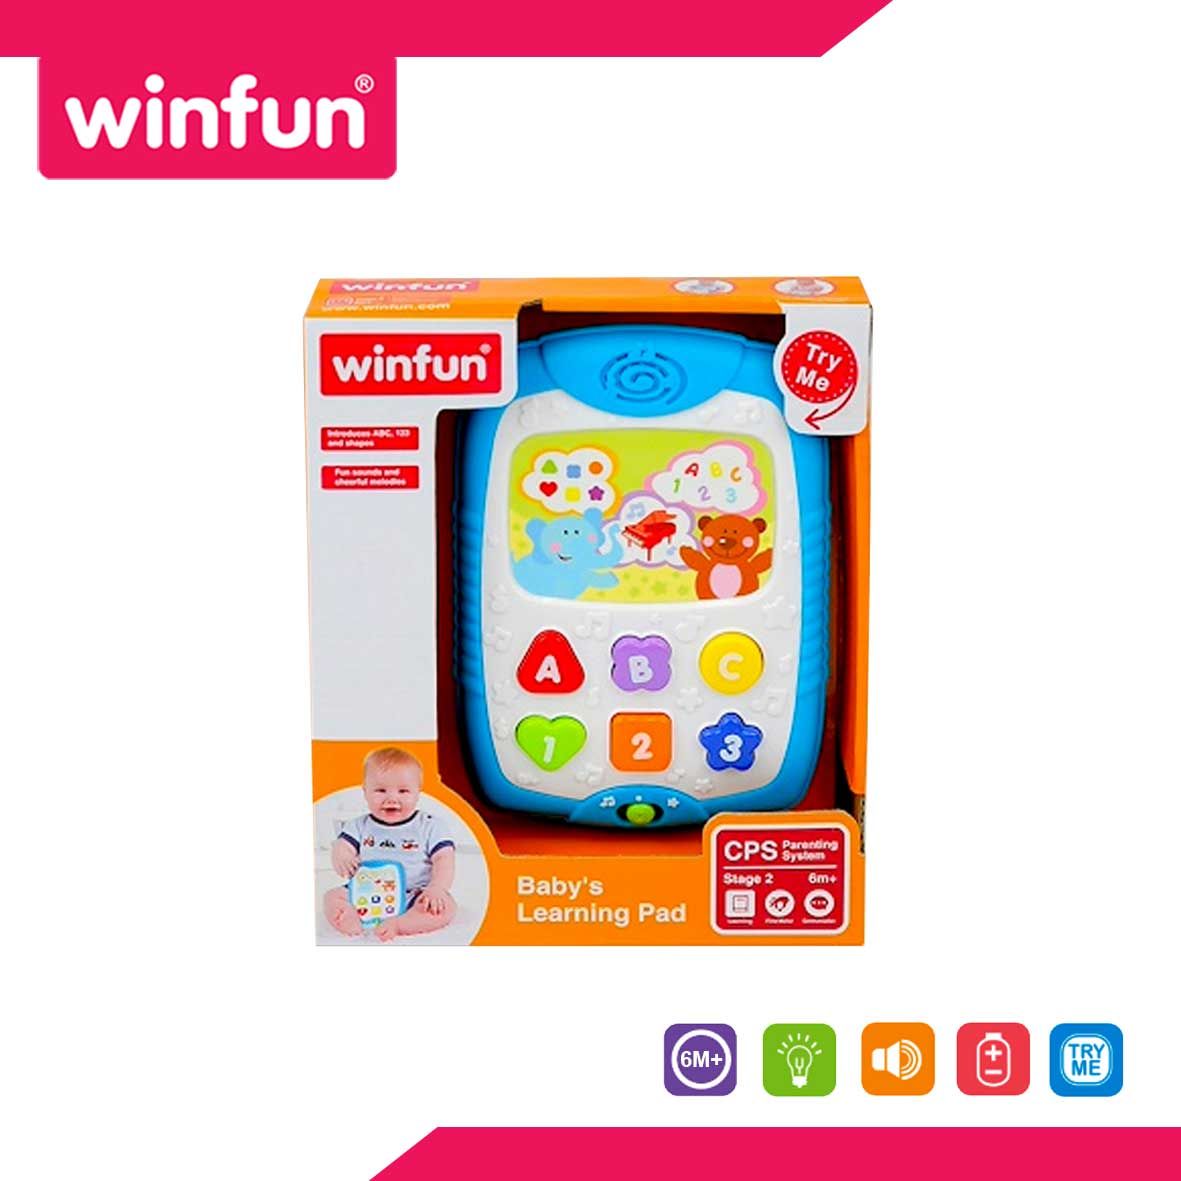 WinFun Baby's Learning Pad - 1